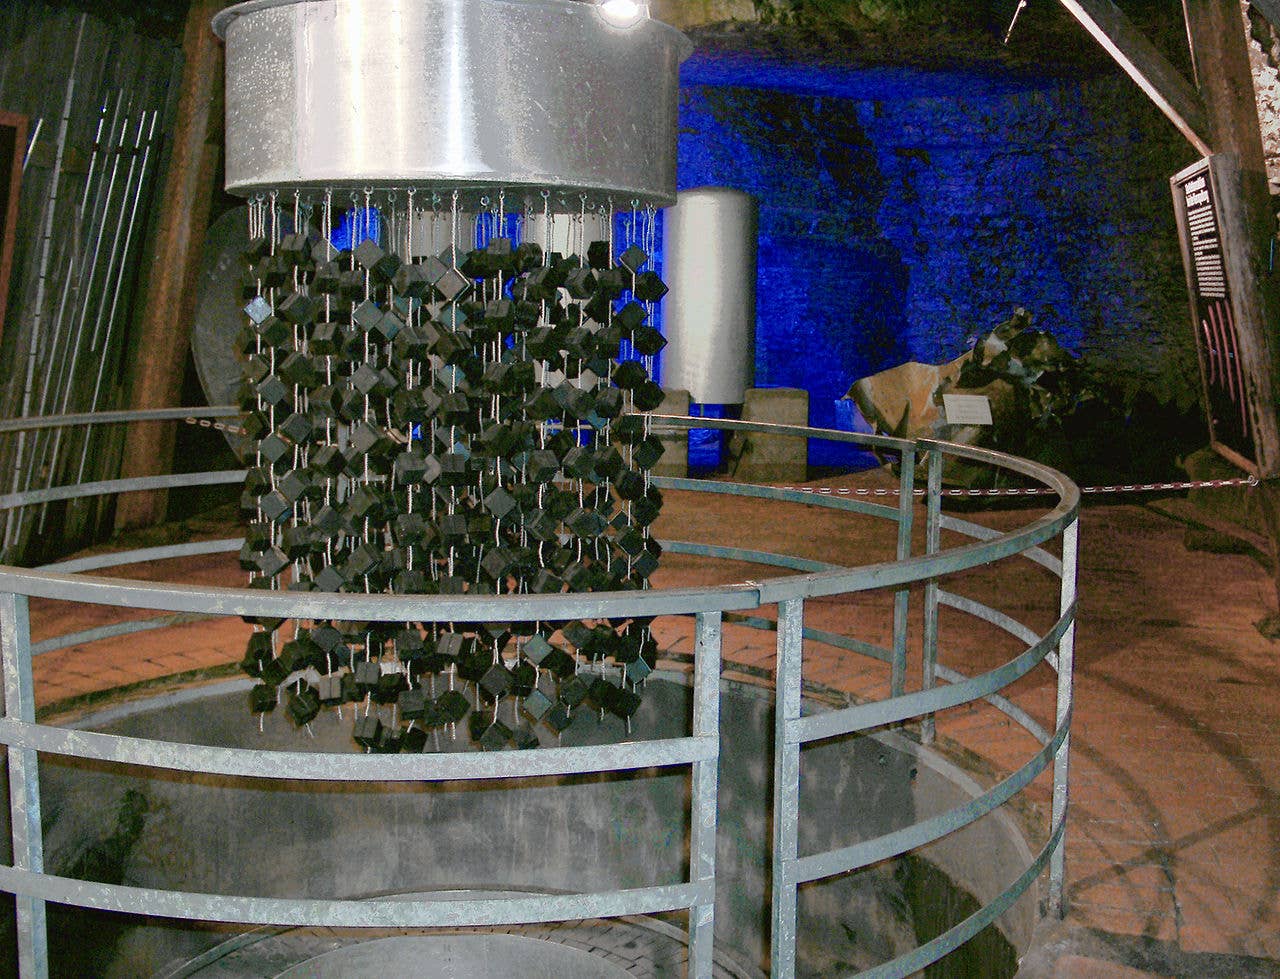 Replica of the nuclear reactor at Haigerloch museum. (Wikipedia)